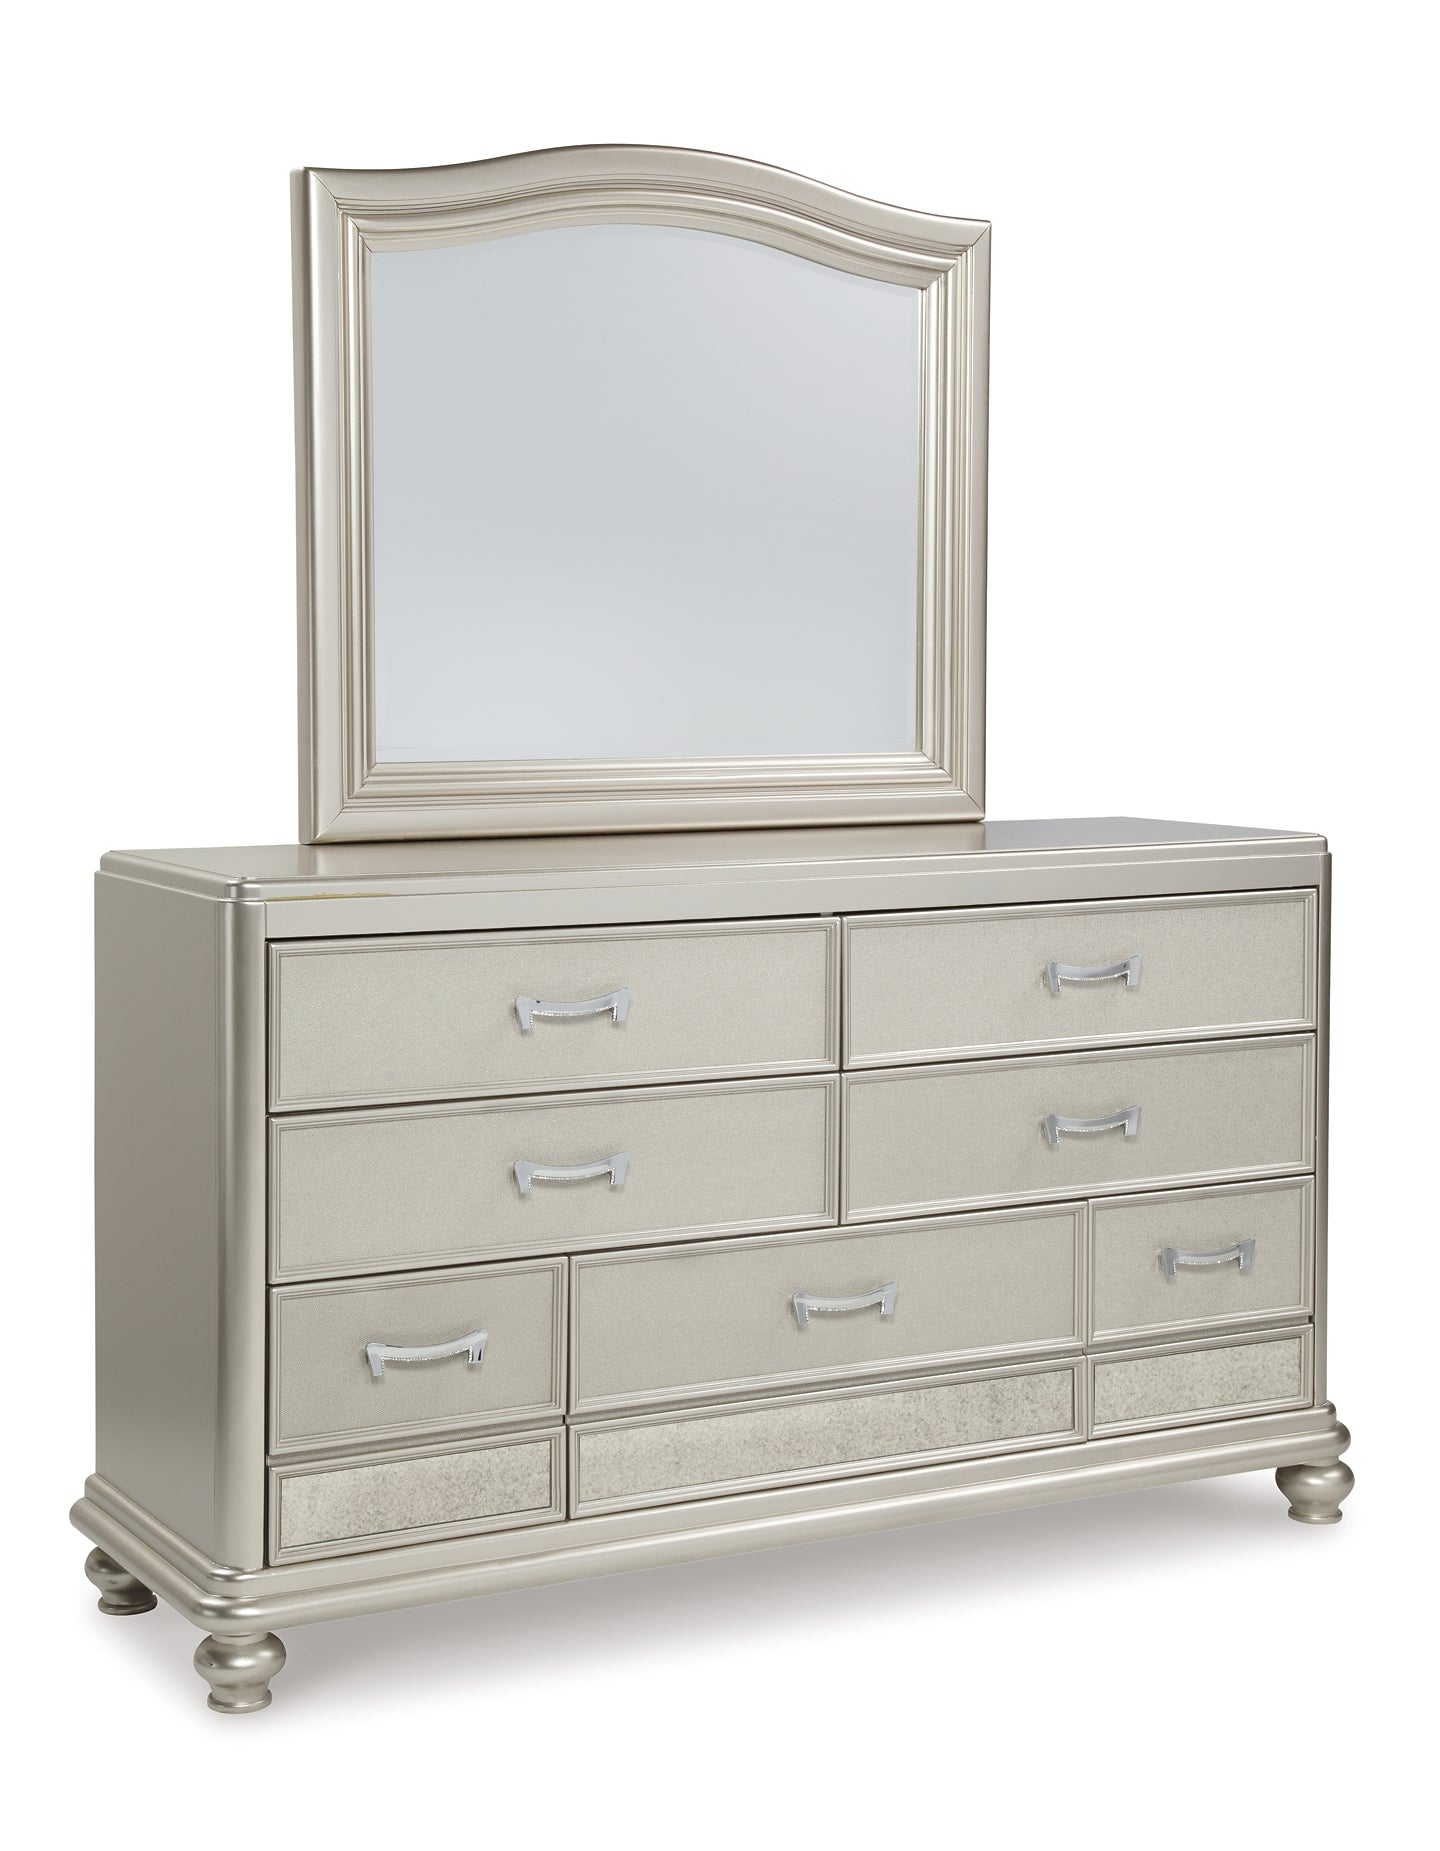 Coralayne California King Upholstered Bed with Mirrored Dresser Wilson Furniture (OH)  in Bridgeport, Ohio. Serving Bridgeport, Yorkville, Bellaire, & Avondale